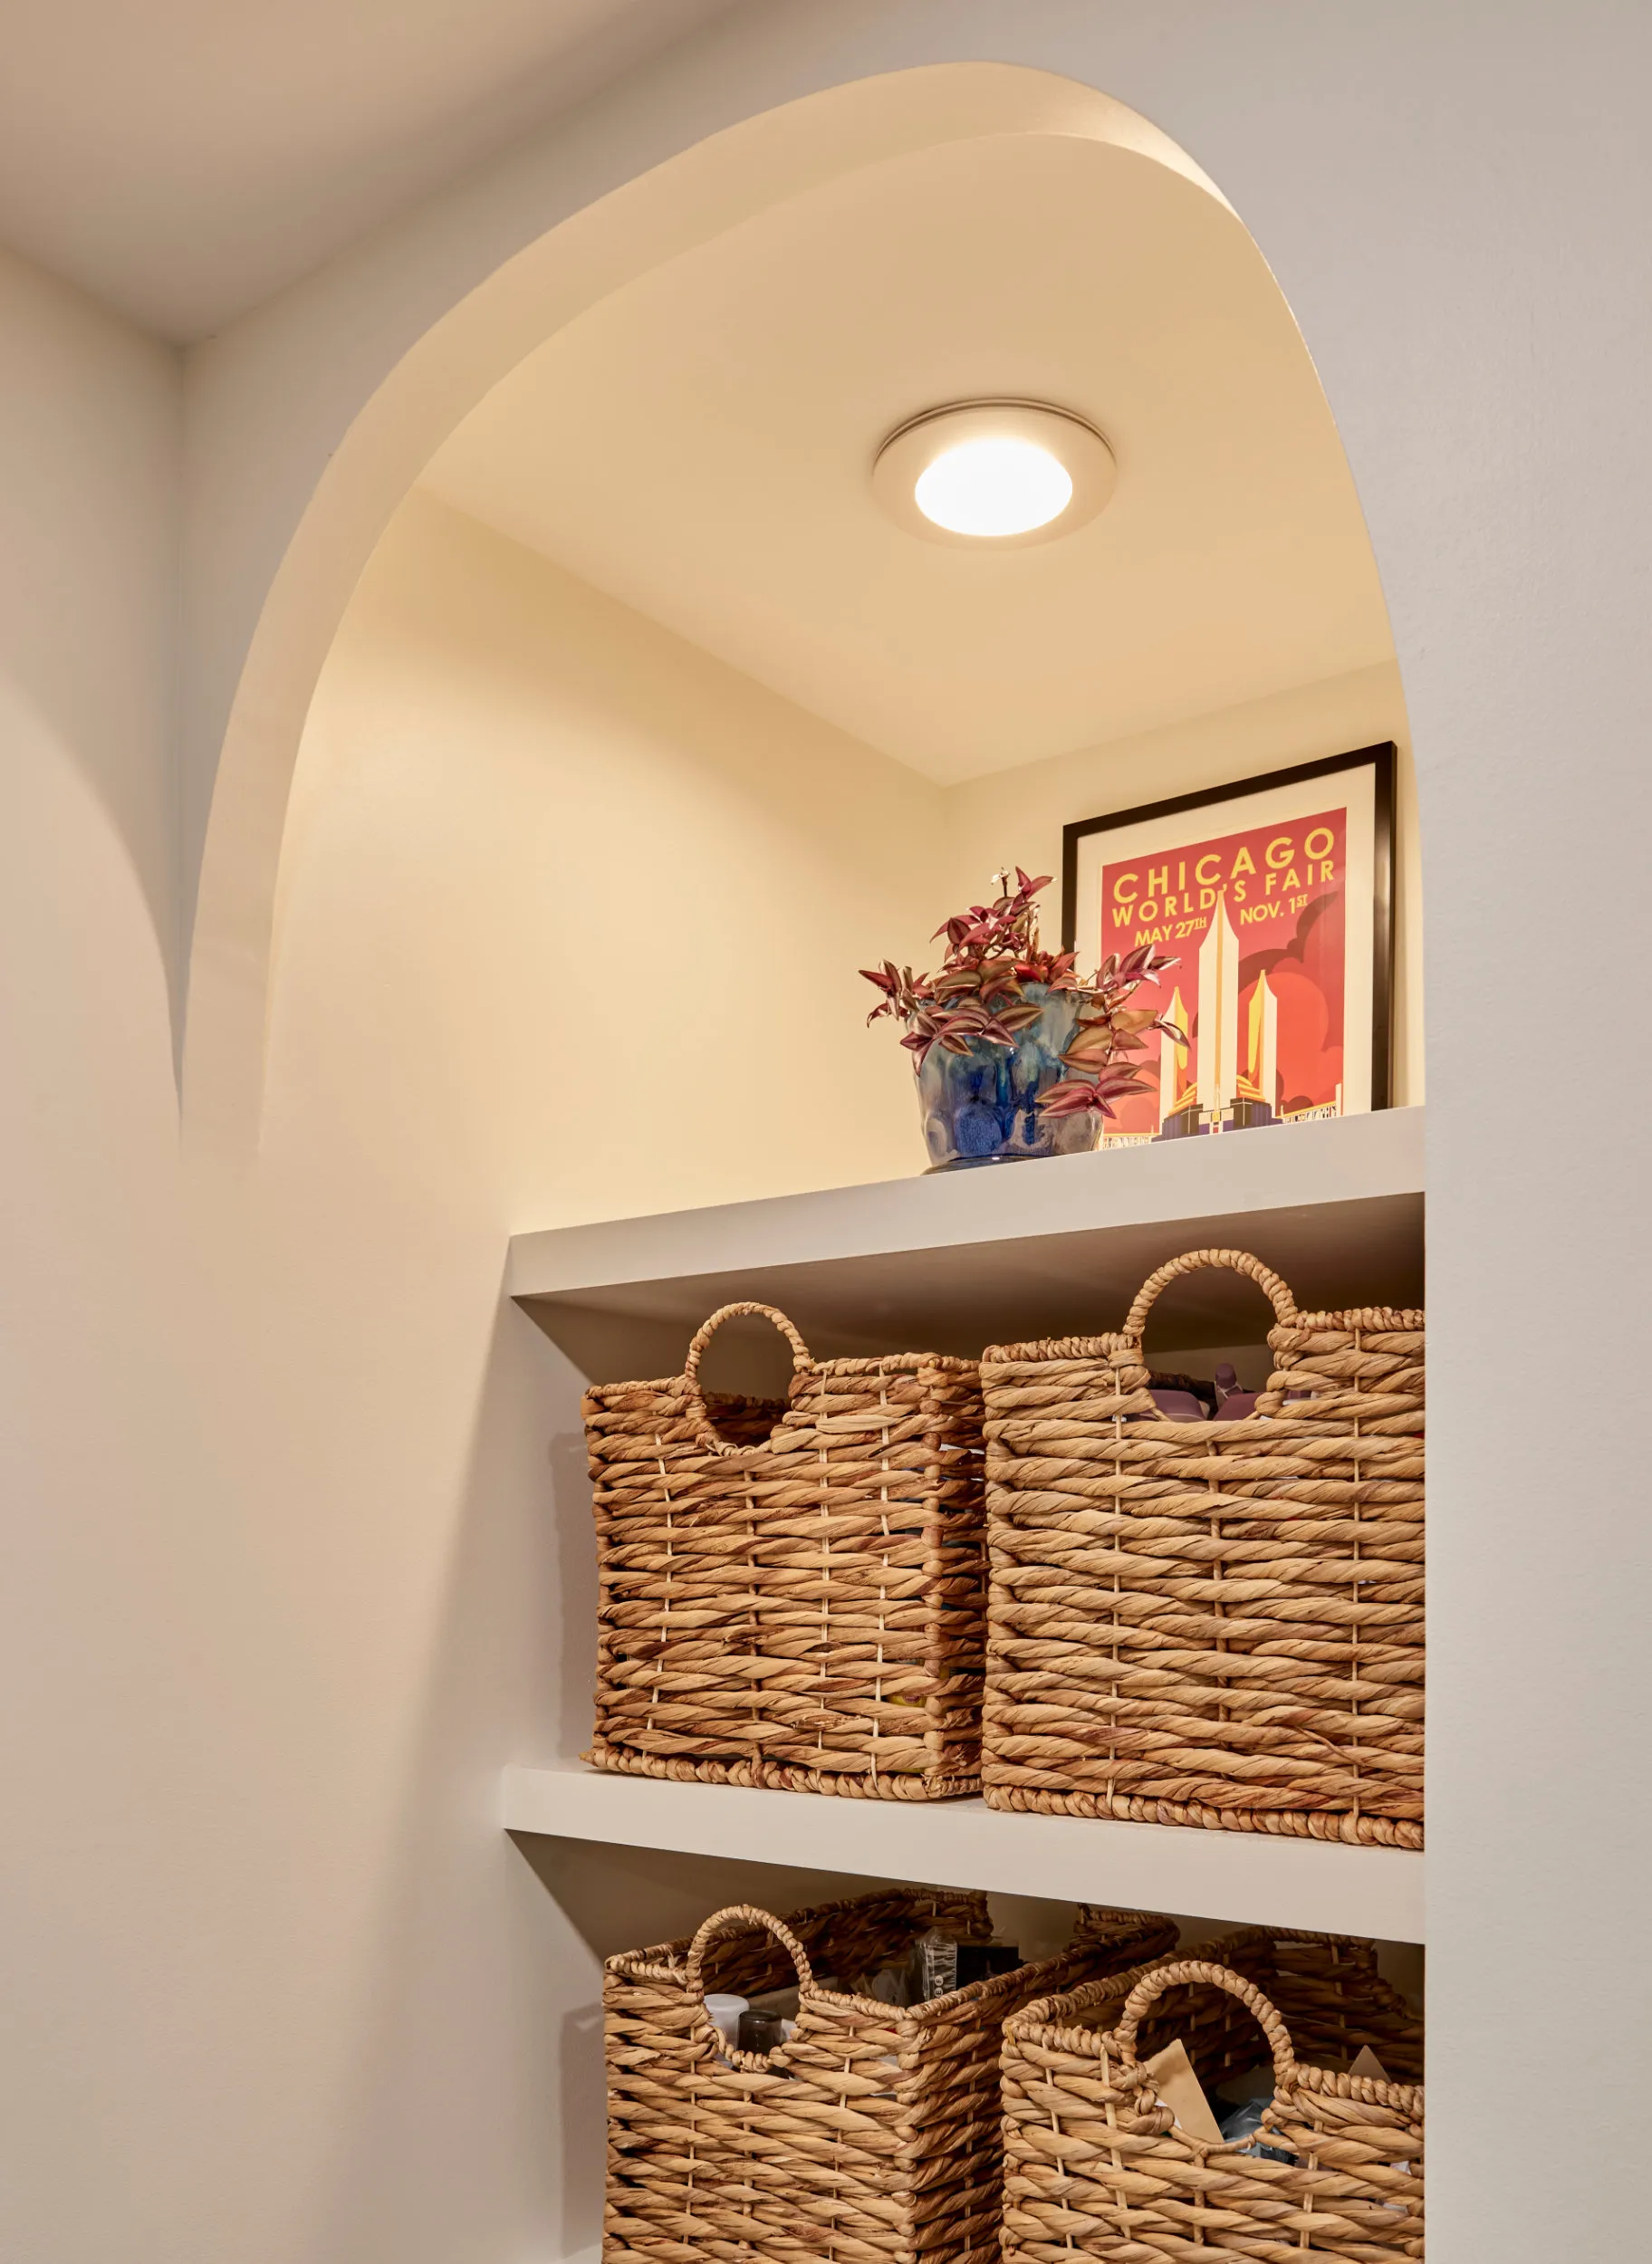 Arched nook with extra storage shelves